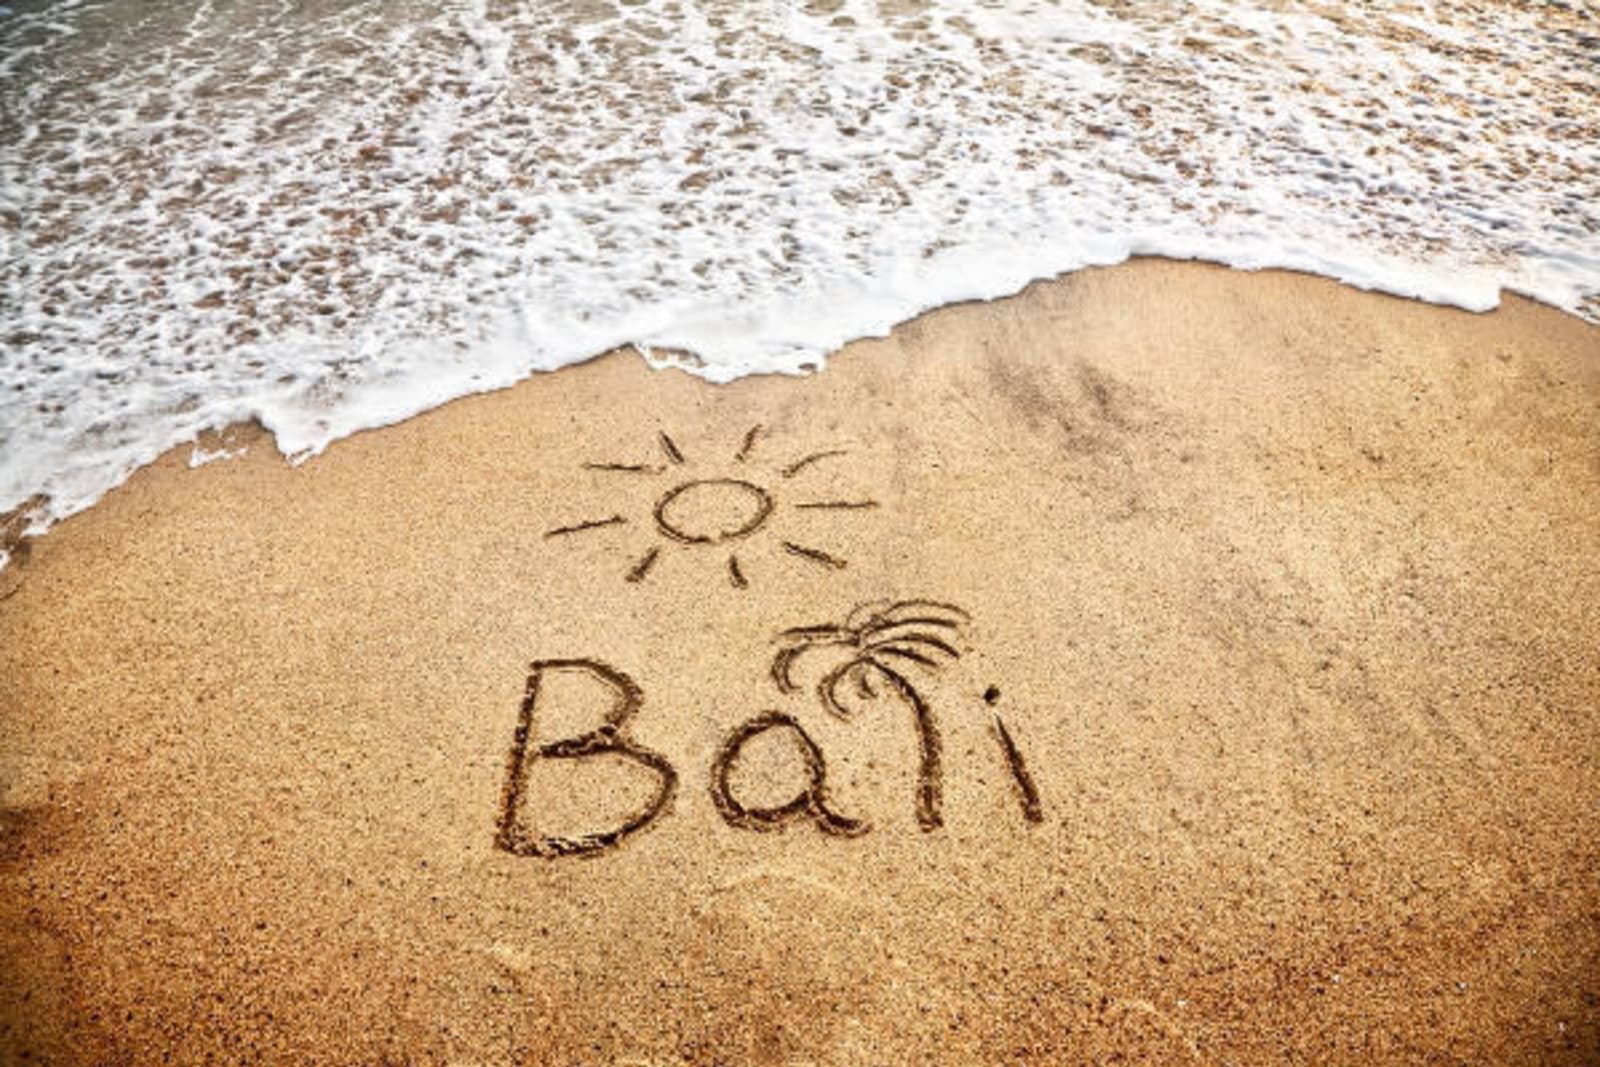 Bali written in the sand with a palm tree for the "L", and a cartoon sun